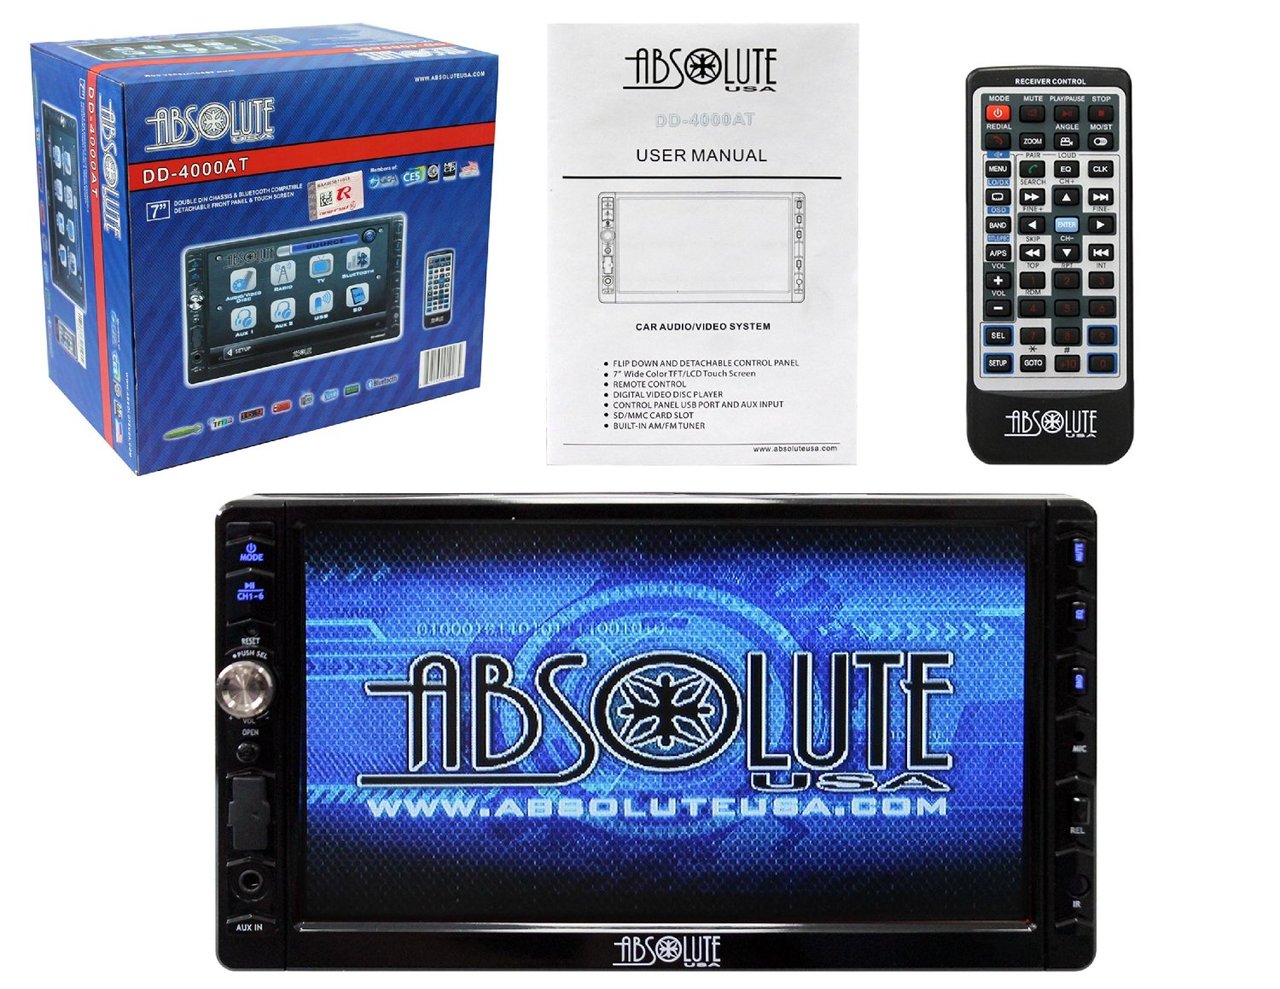 Absolute DD-4000AT 7-Inch Double Din Multimedia DVD / CD / MP3 / USB Receiver with Touch Screen System